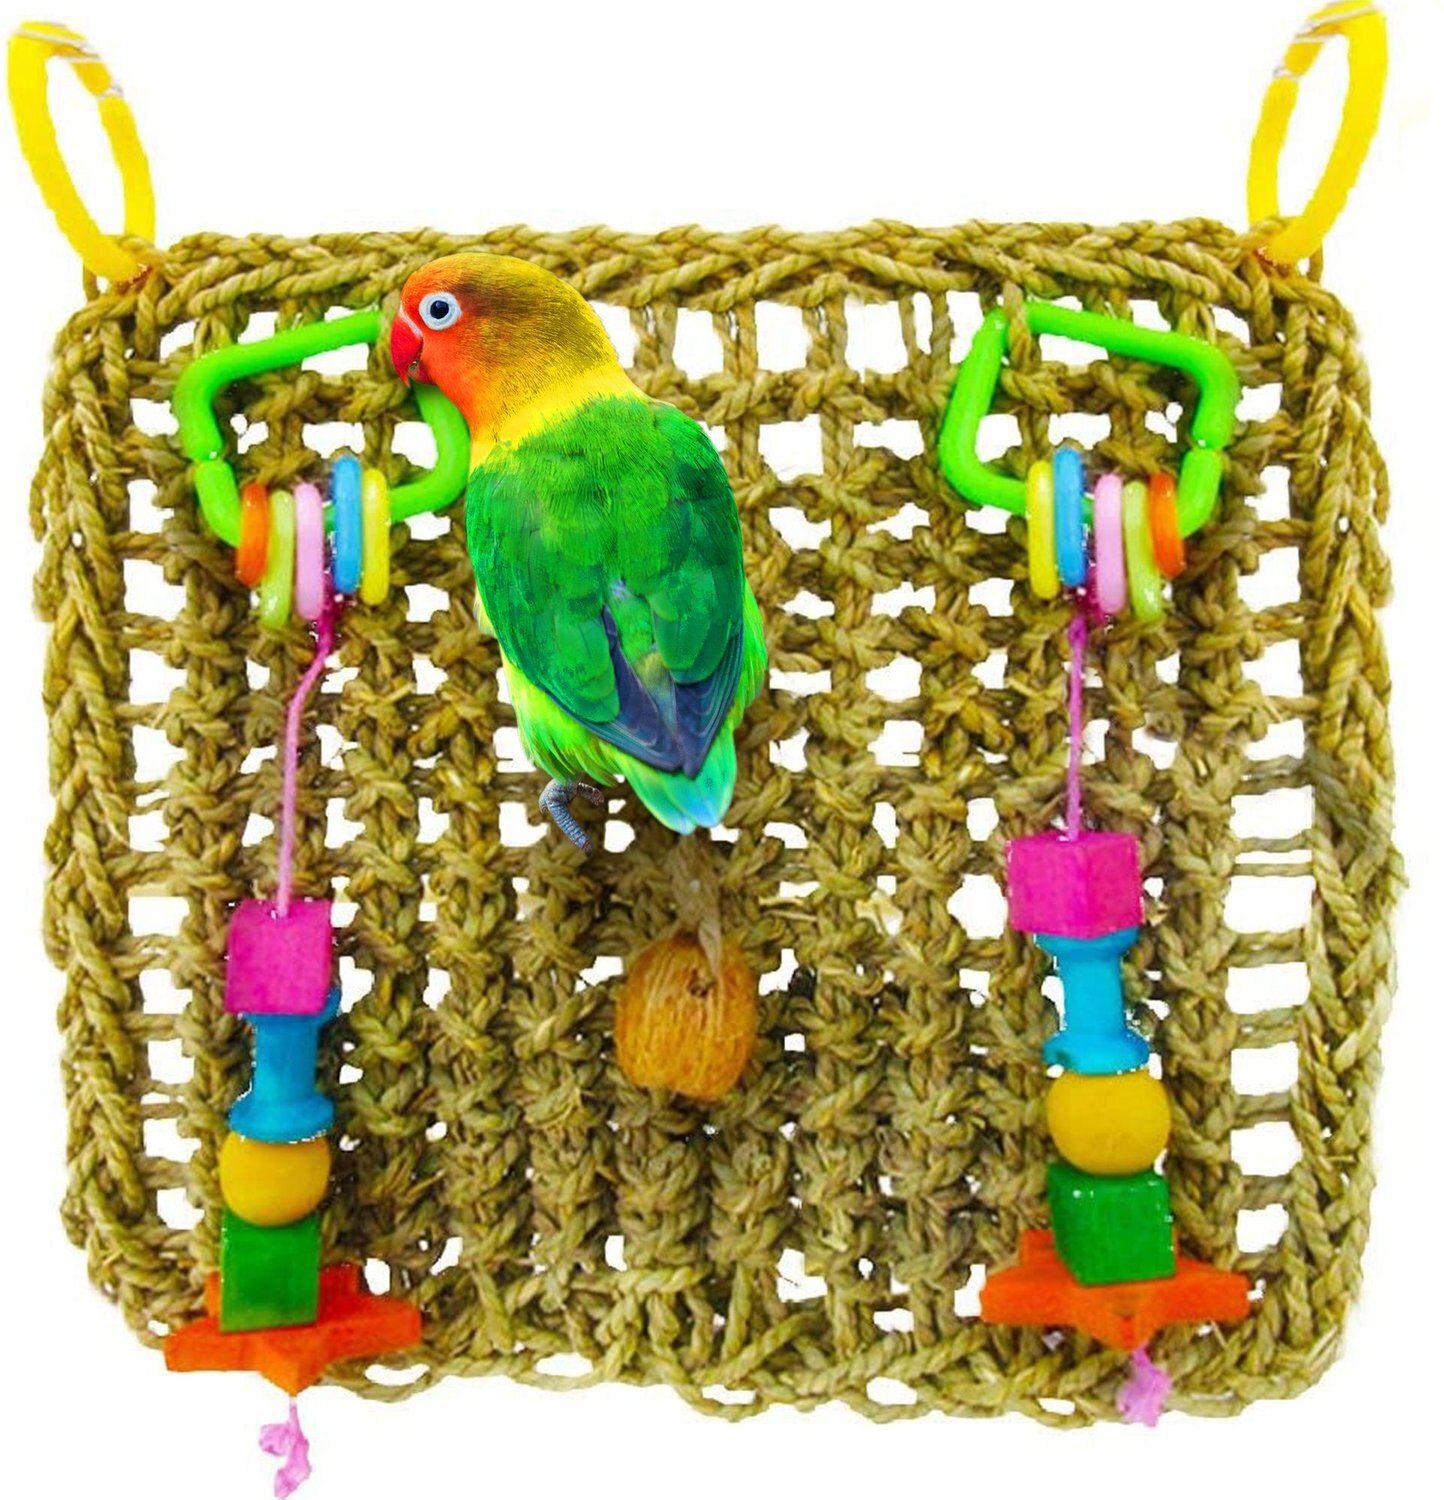 Bird Climbing Rope Ladder Red/Yellow 2 Pcs Pet Climbing Rope Net Small Animal Rope Net Hanging Hammock Activity Toy for Rat Hamster Cockatiels Habitat Decor and Play Ferret Cotton Rope Net 